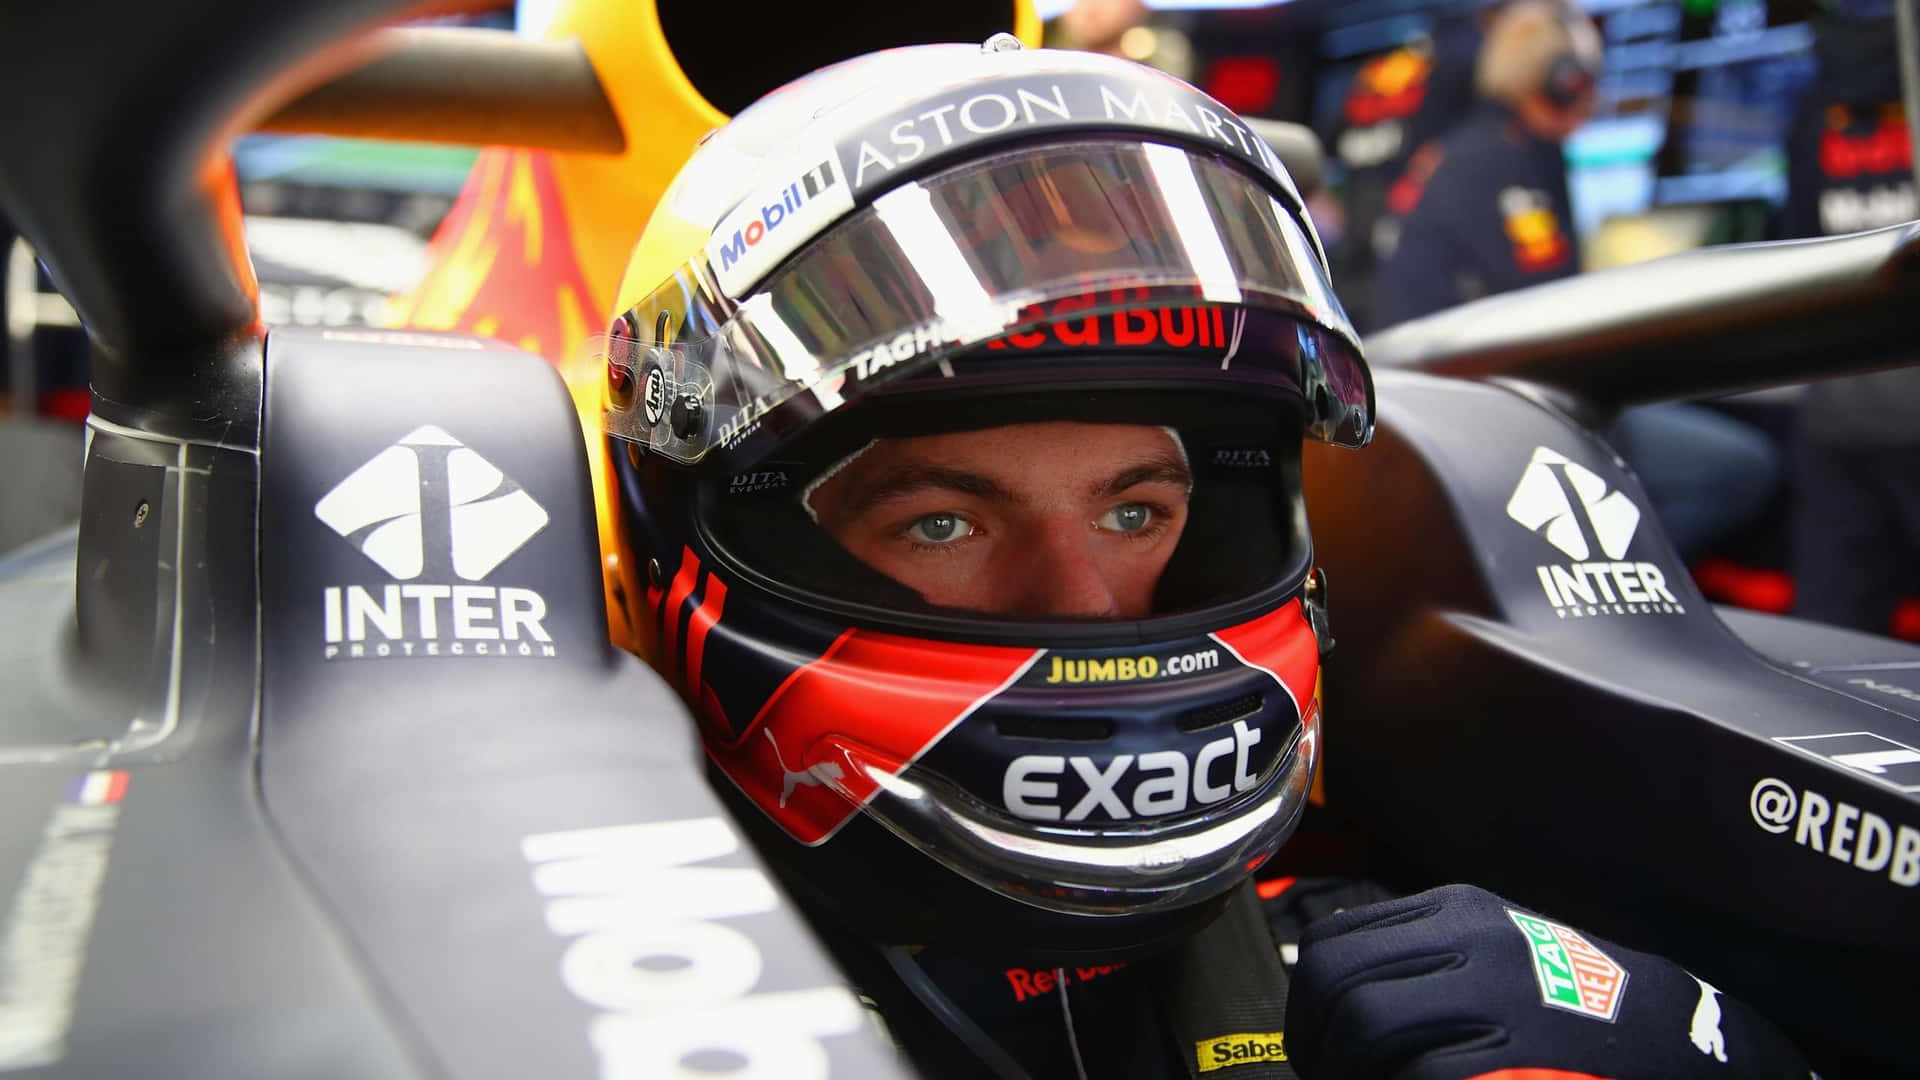 Max Verstappen racing on the track during a Formula 1 event